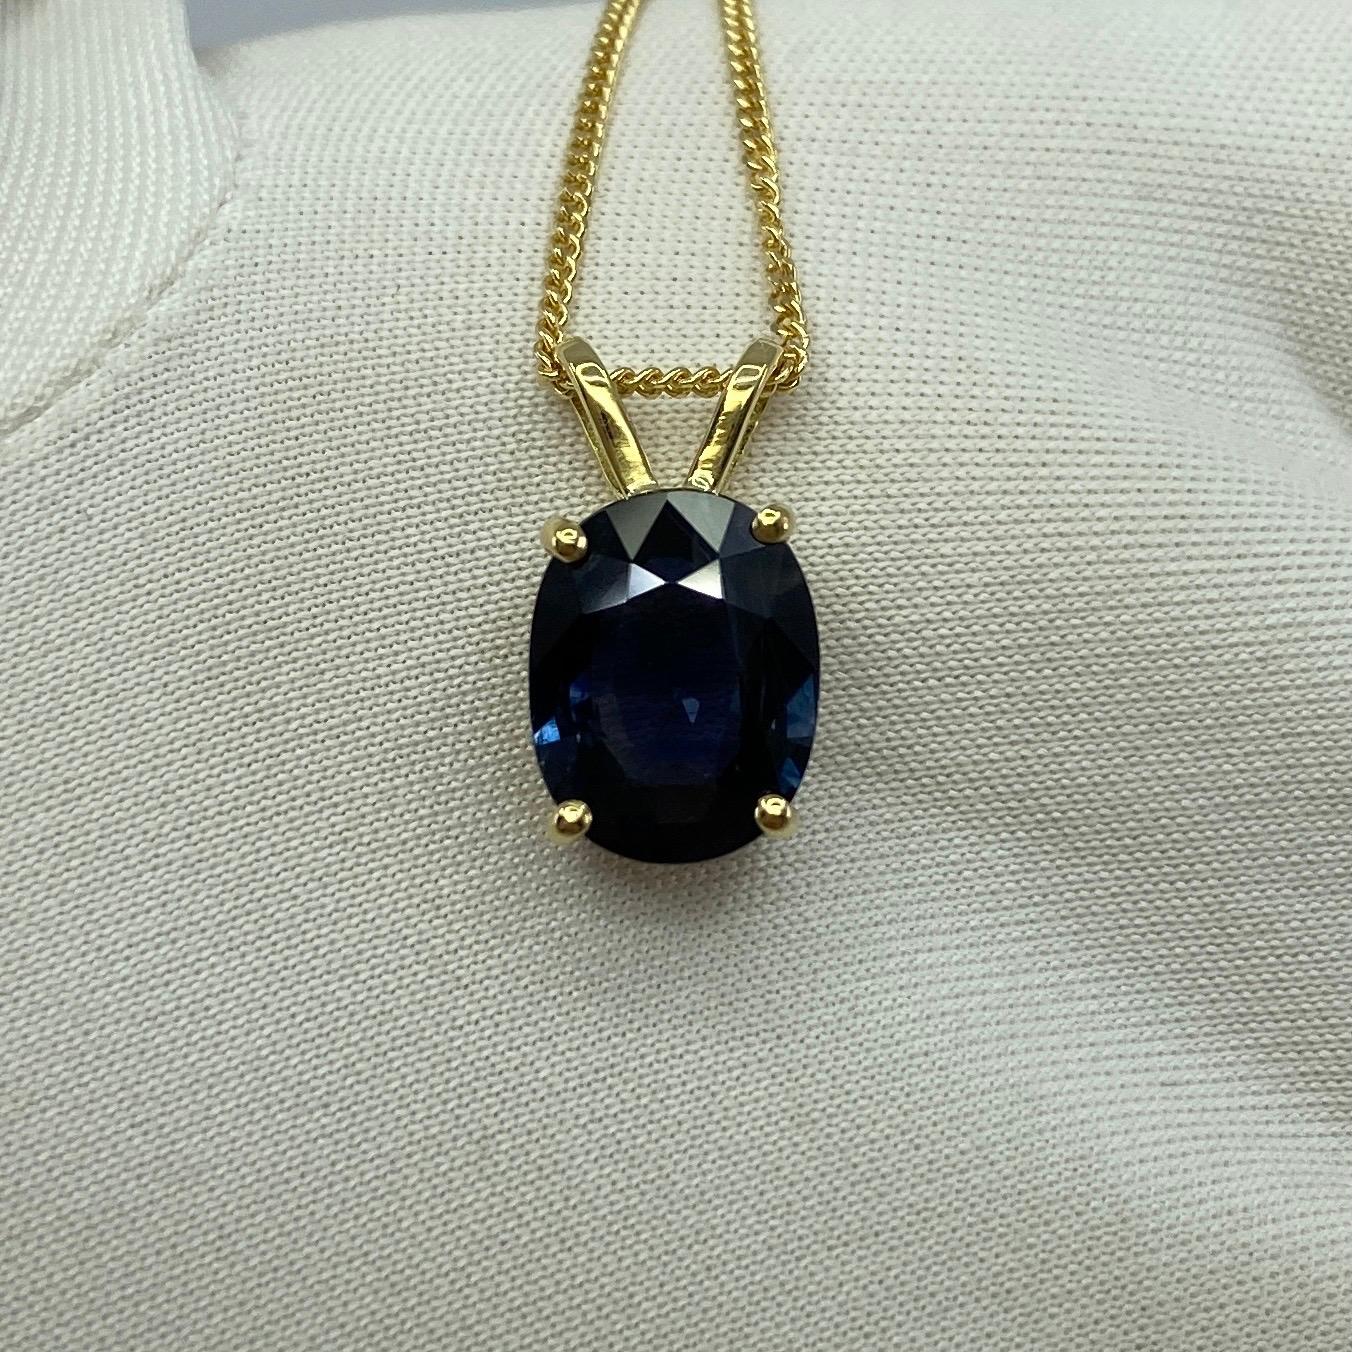 GIA Certified 2.51ct Untreated Deep Blue Sapphire Oval 18k Yellow Gold Pendant 5